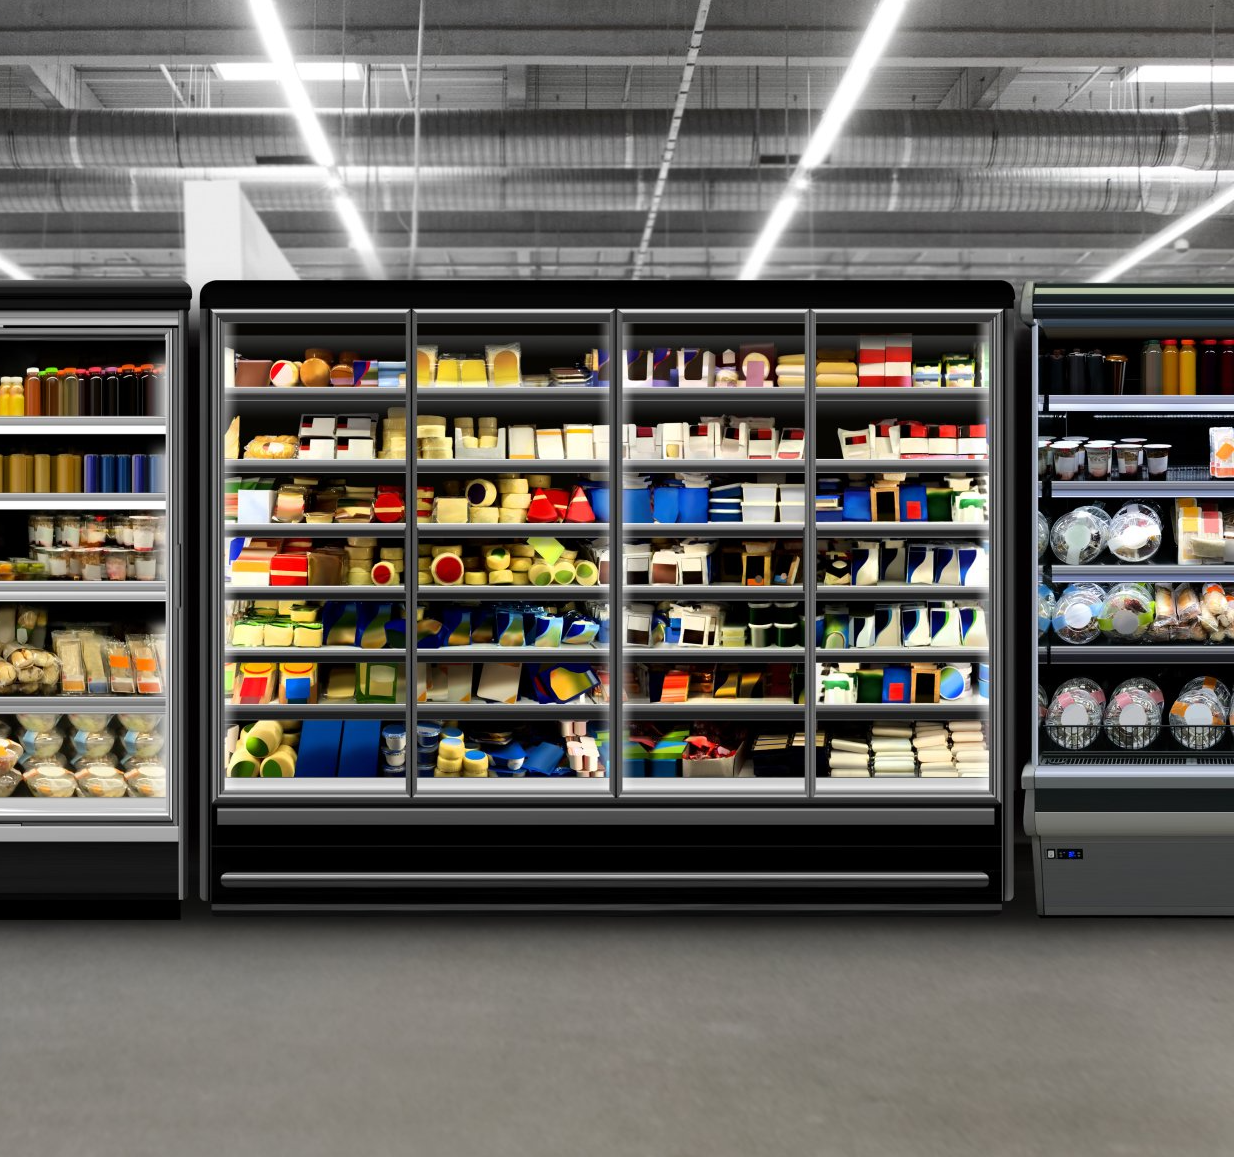 7 Essential Tips for Restaurant Owners to Maintain Walk-in Refrigerators and Freezers